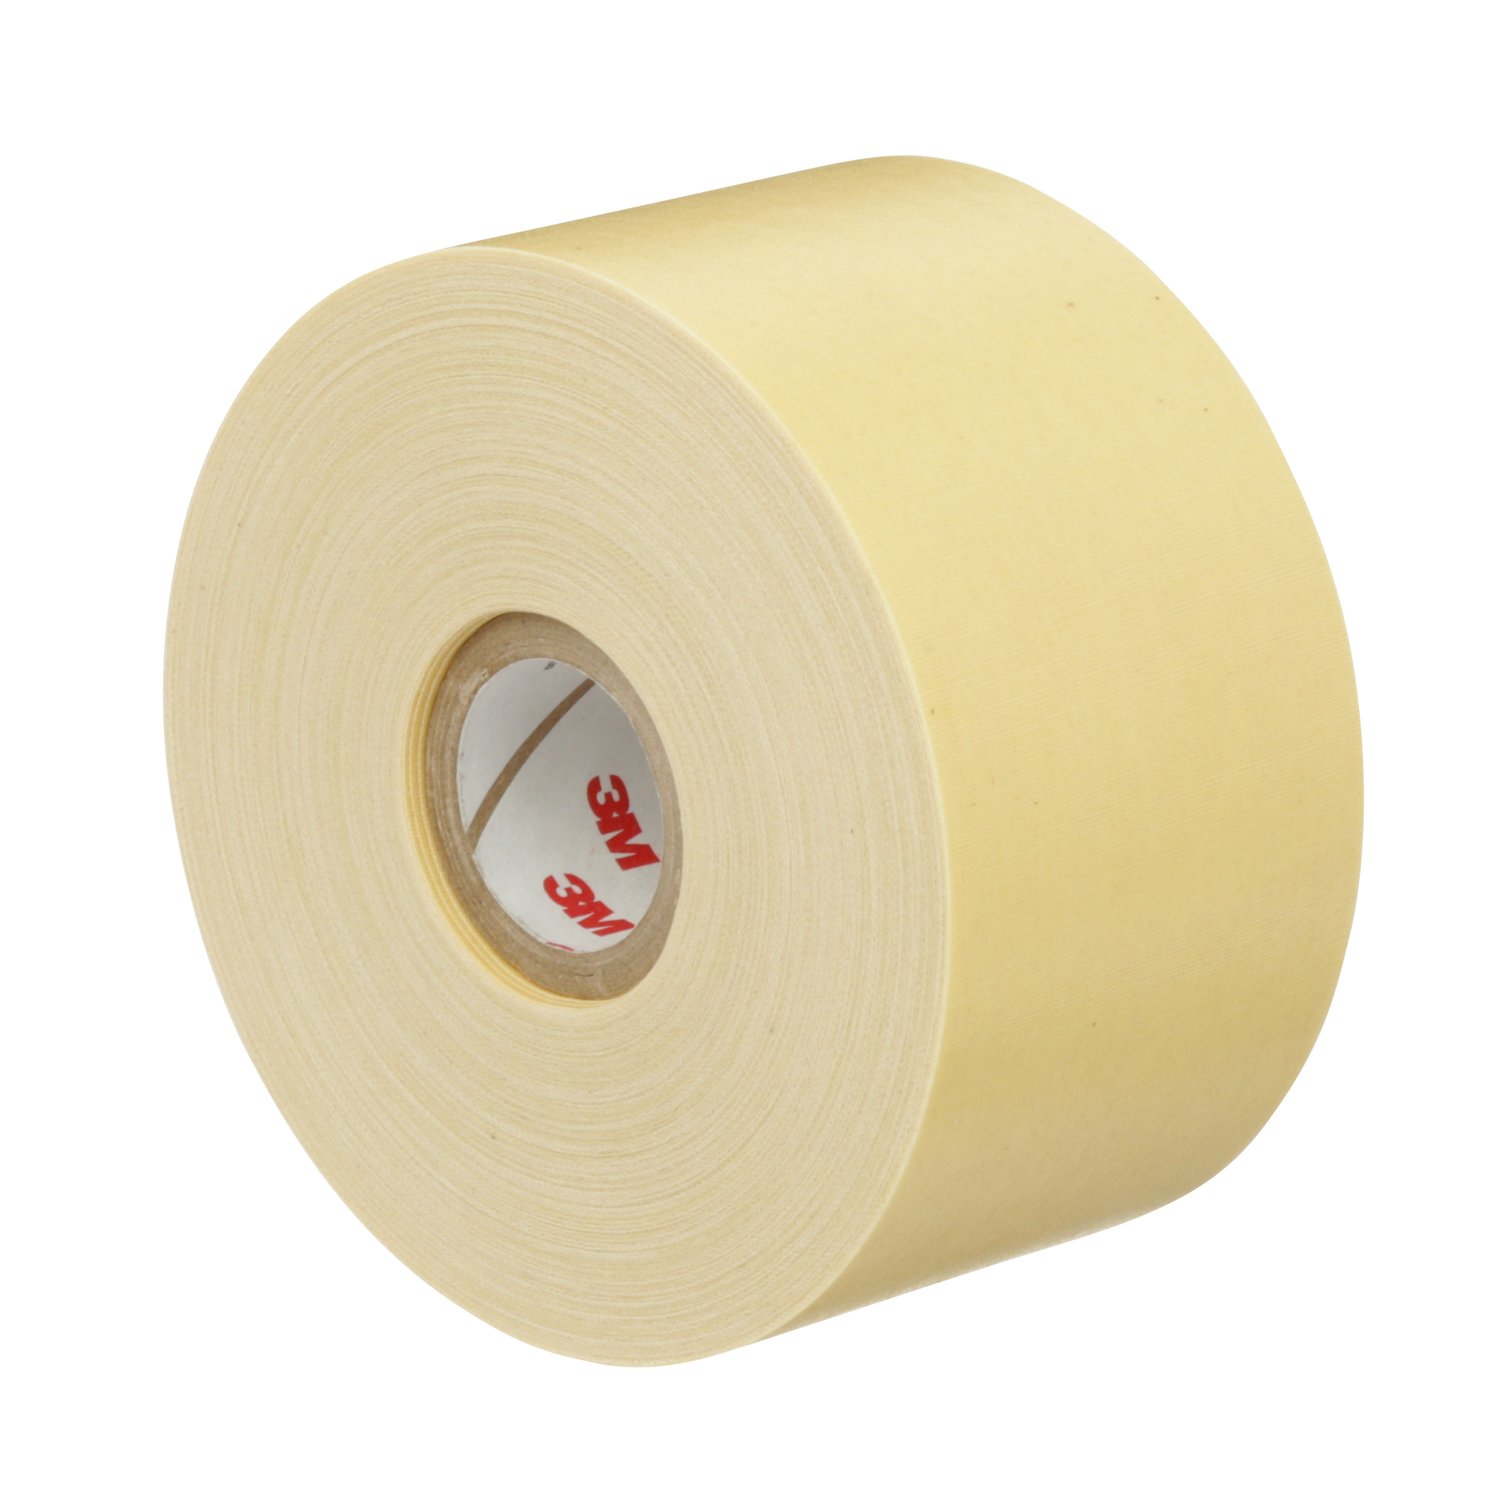 7000132814 - Scotch Varnished Cambric Tape 2520, 2 in x 36 yd, Yellow, 16 rolls/Case